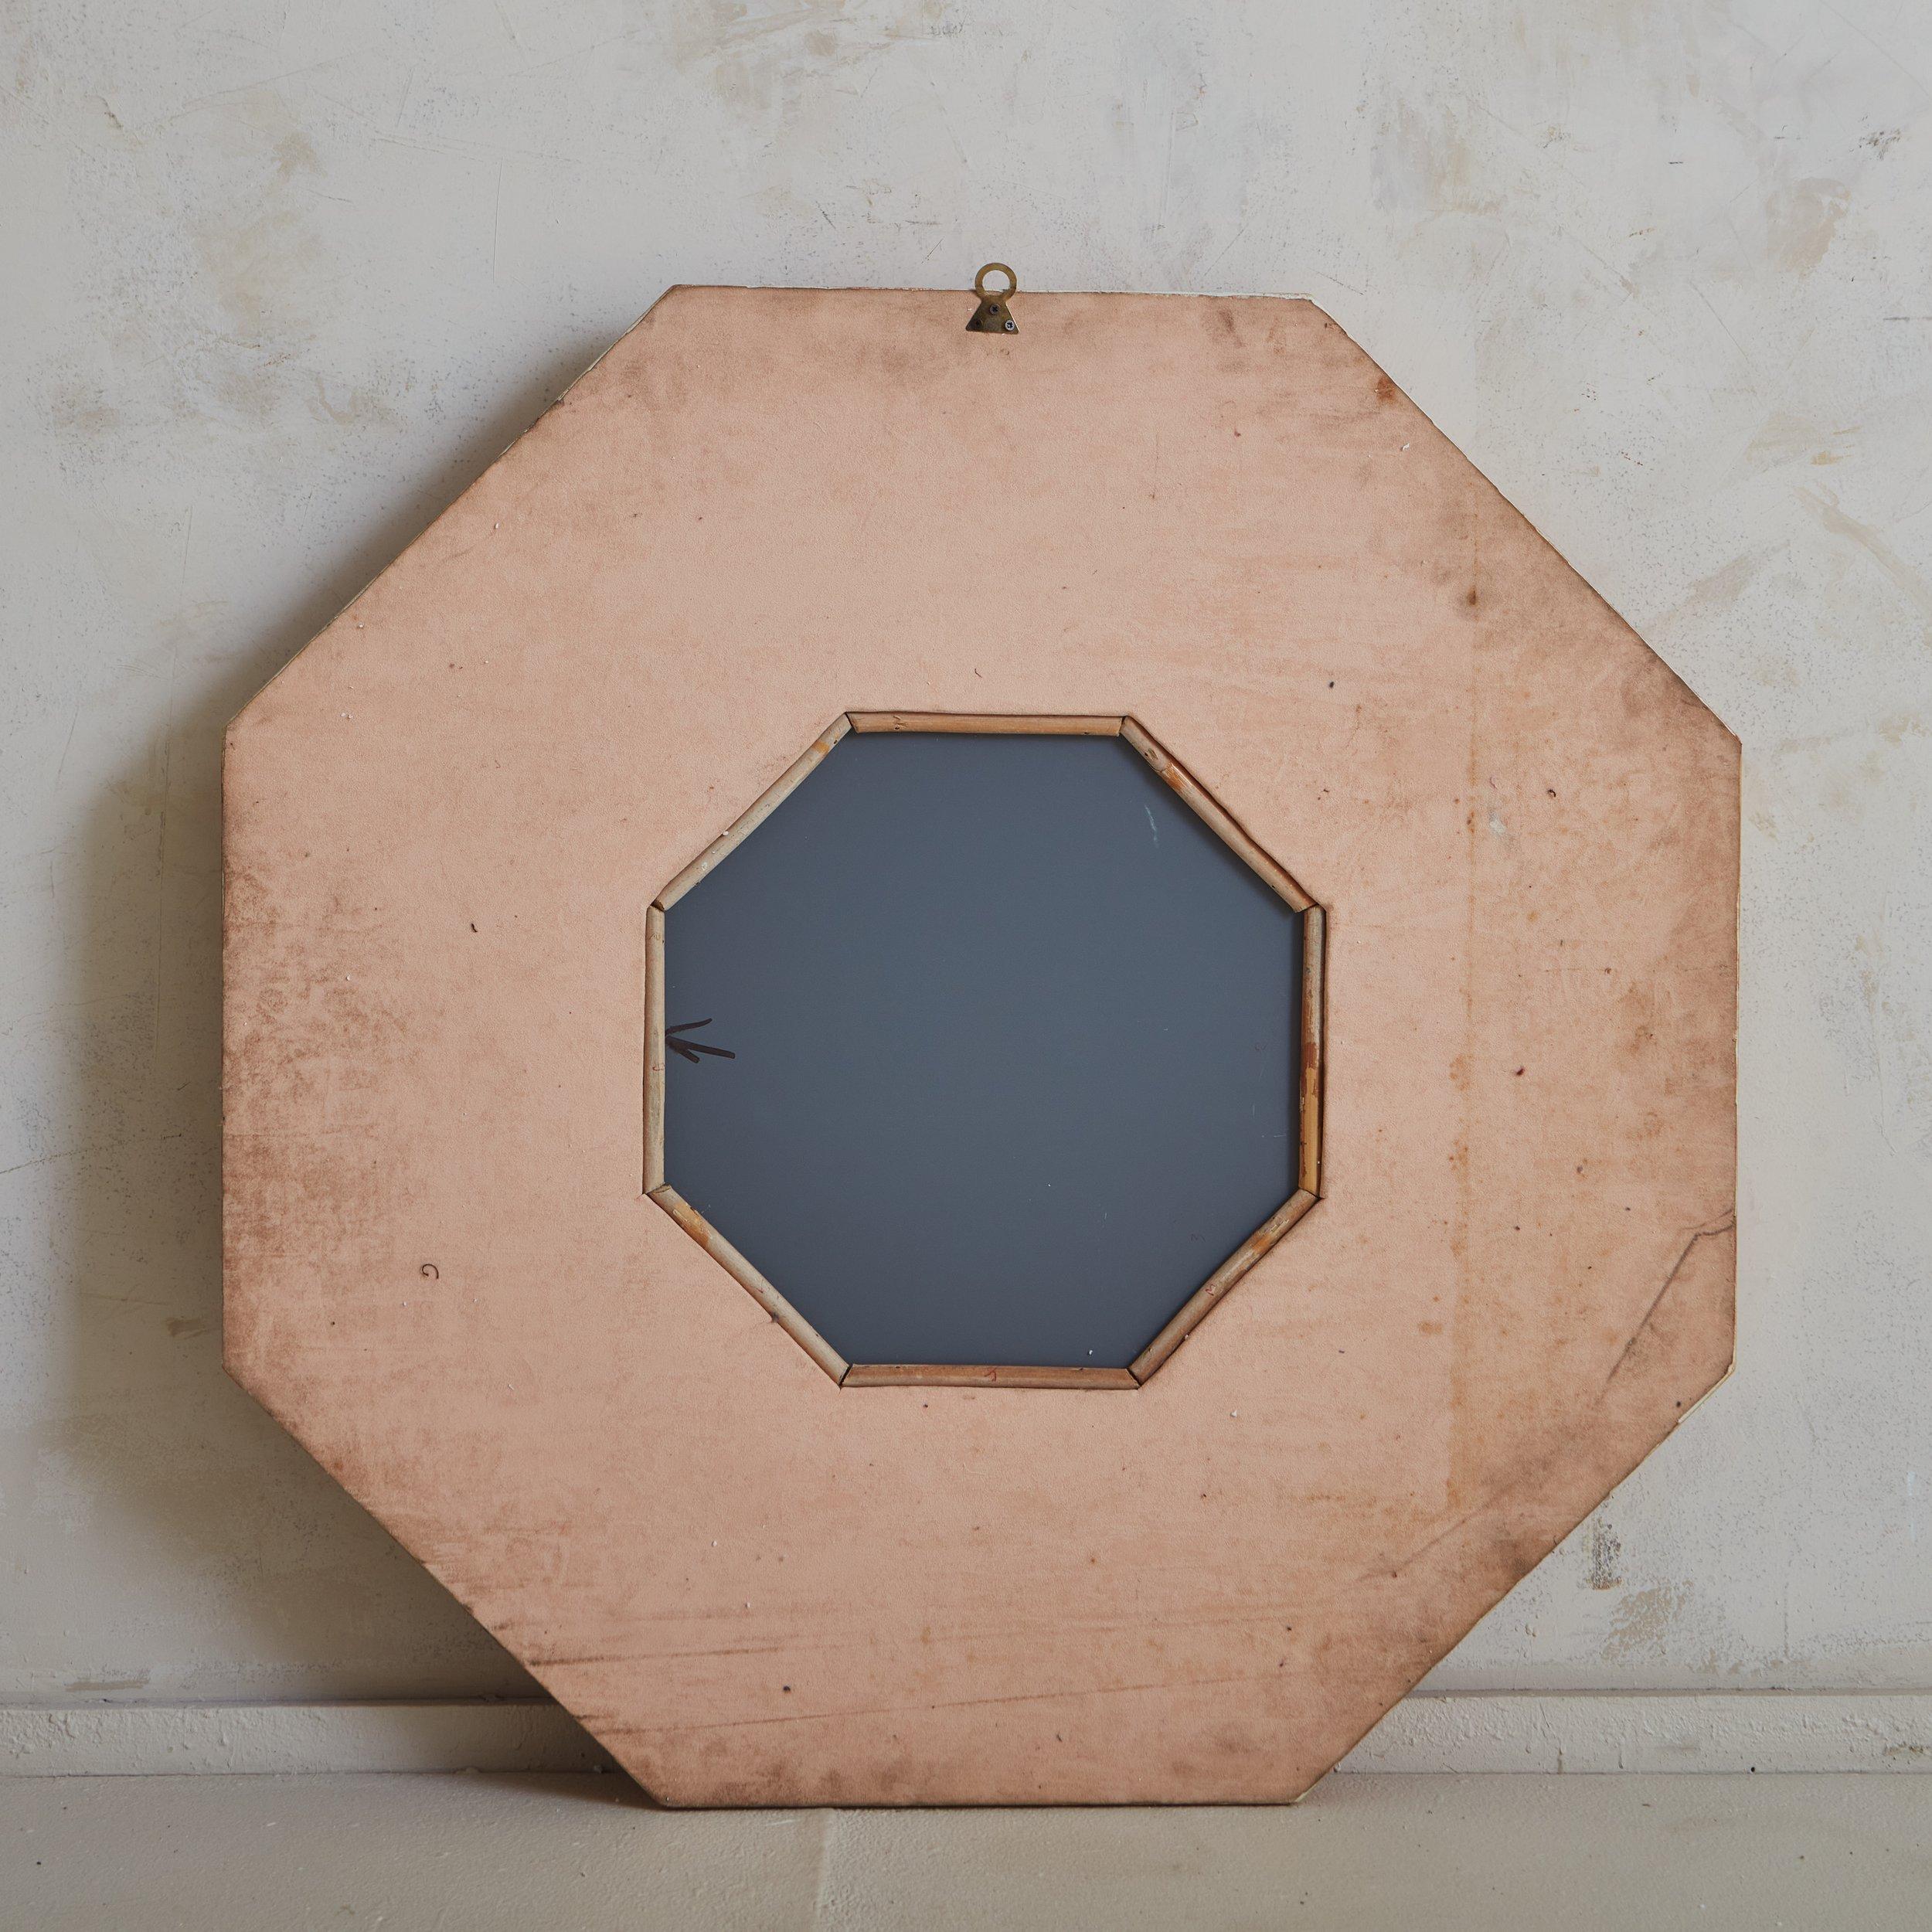 Coral Marbleized Hexagonal Wall Mirror, Italy 1960s For Sale 4